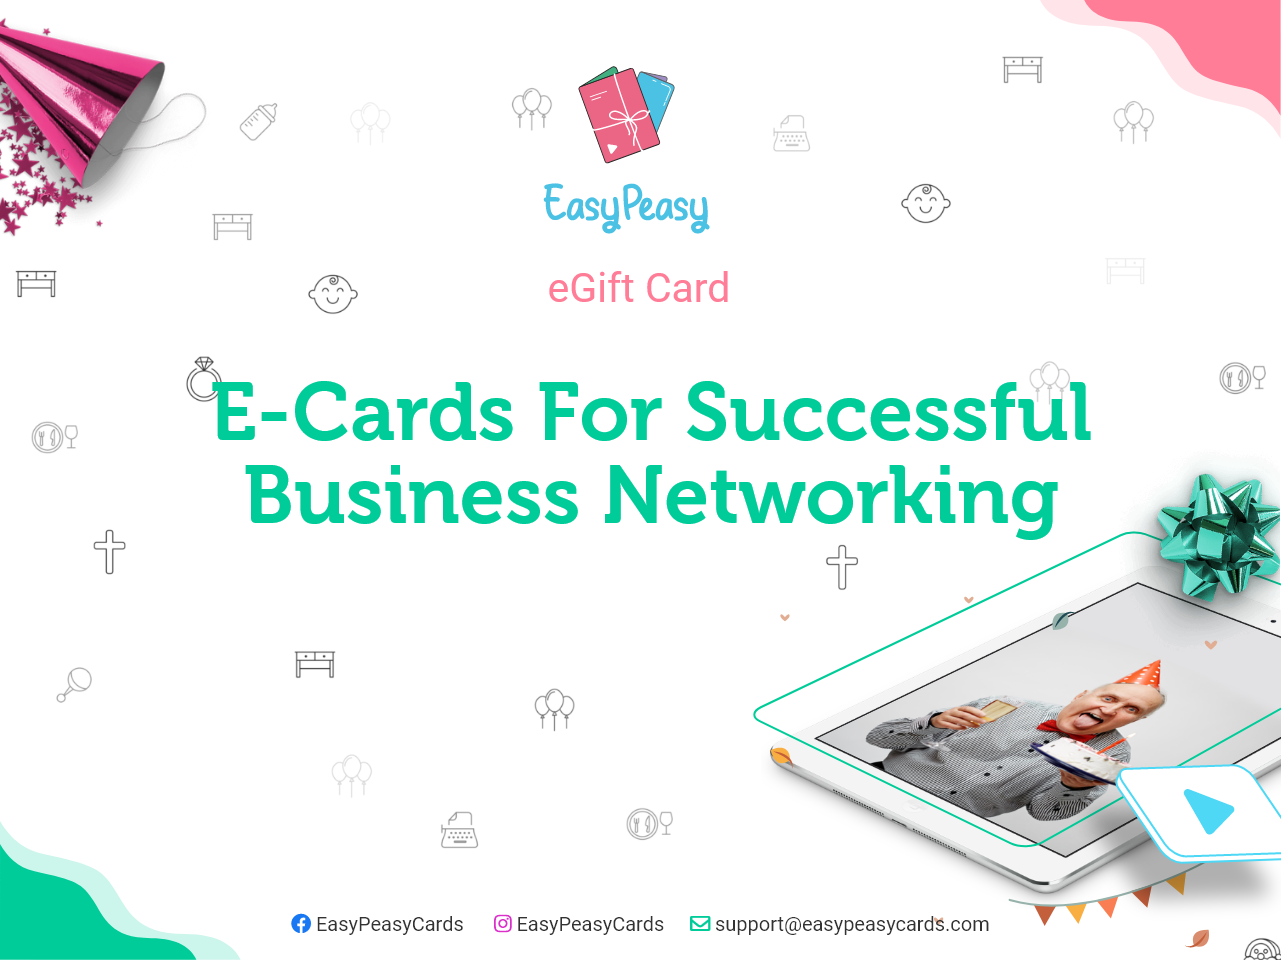 Build-Up Businesses by Strengthening Personal Connections with EasyPeasy